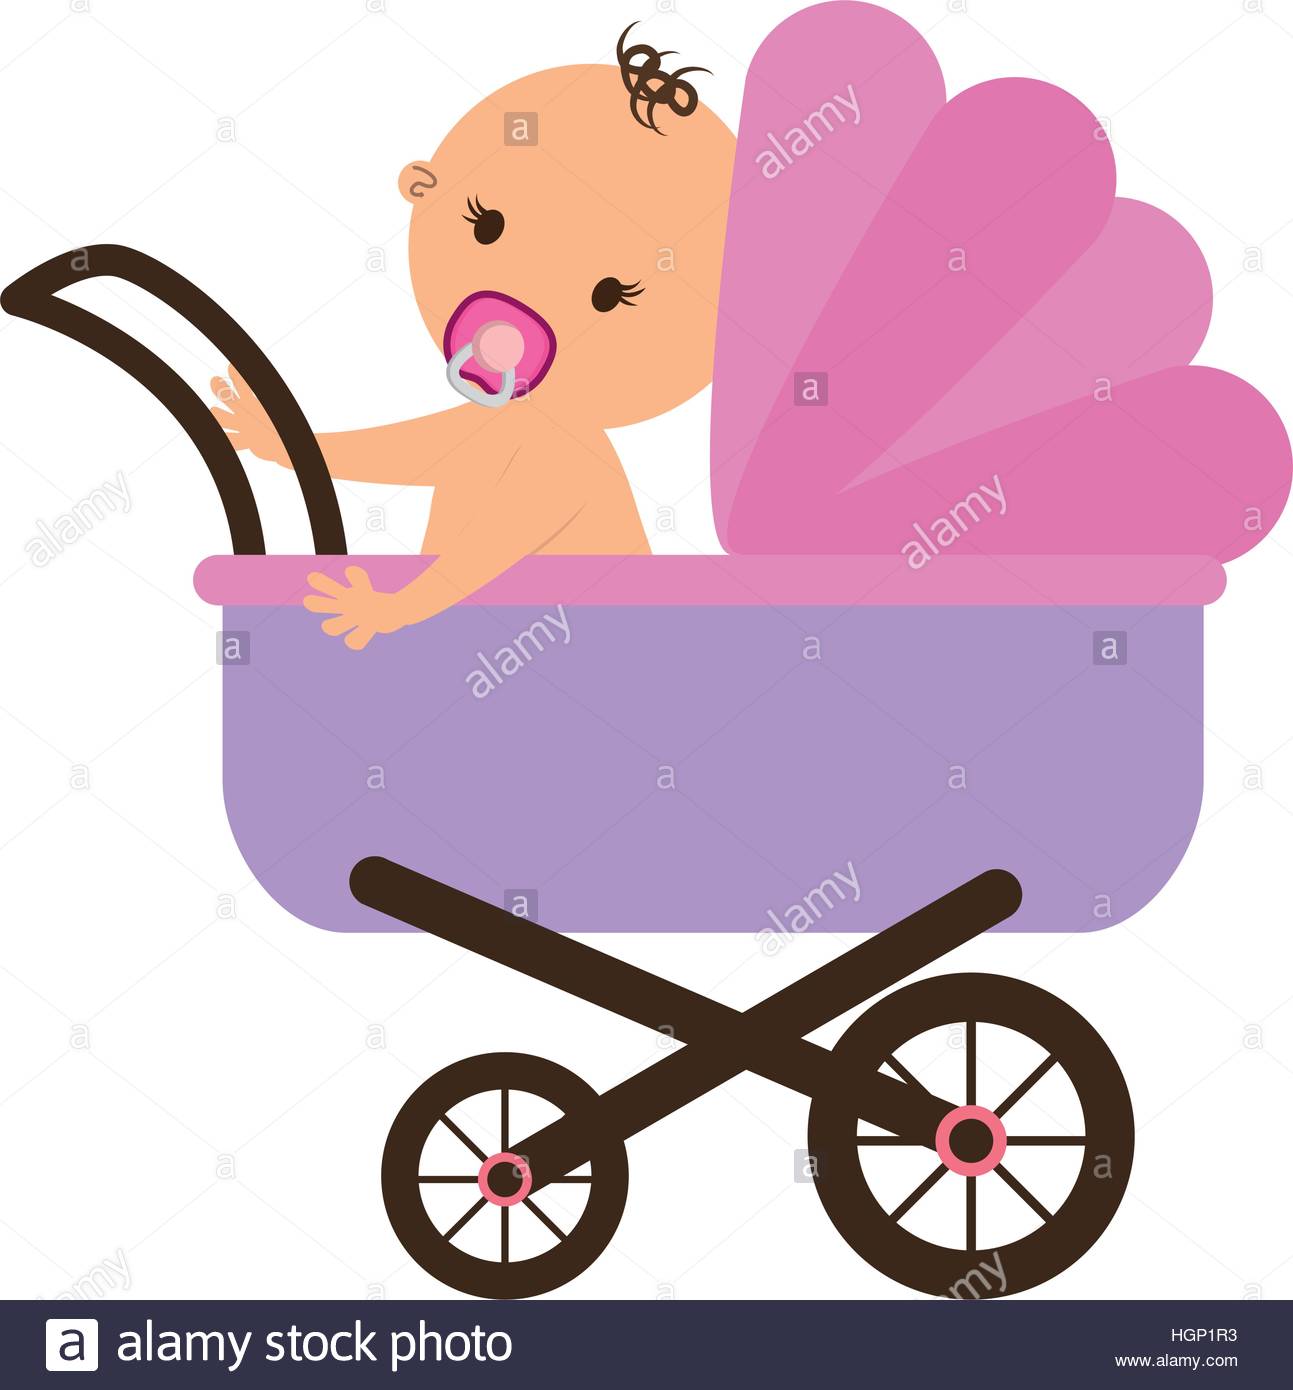 Baby, baby girl, newborn, raw, simple icon | Icon search engine